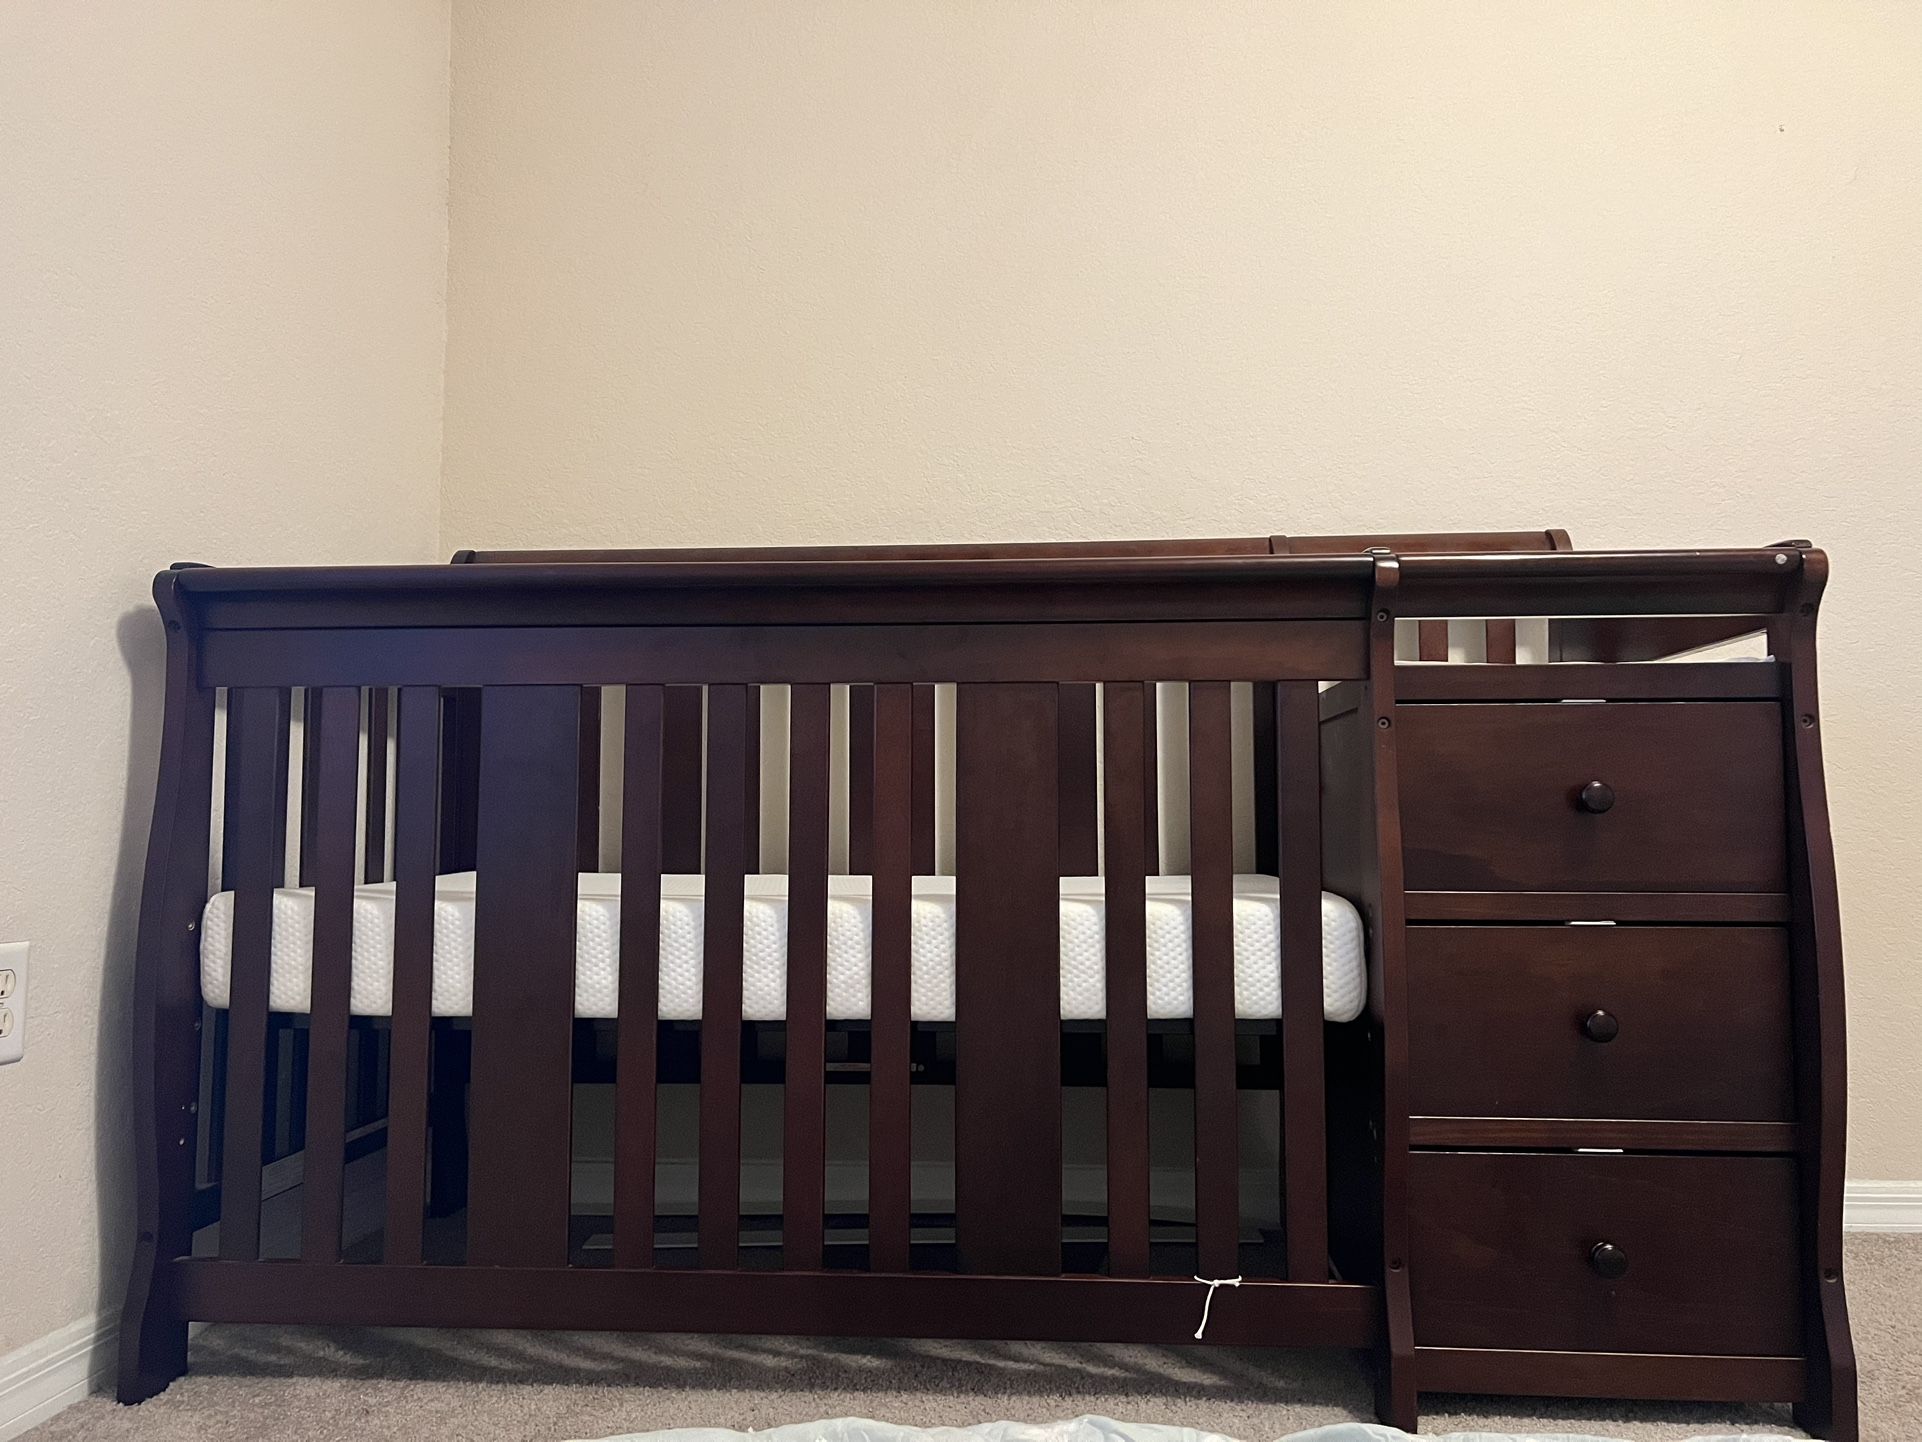 Portofino 5 in 1 Convertible Crib and changer with mattress for sale @ 50% off from MSRP